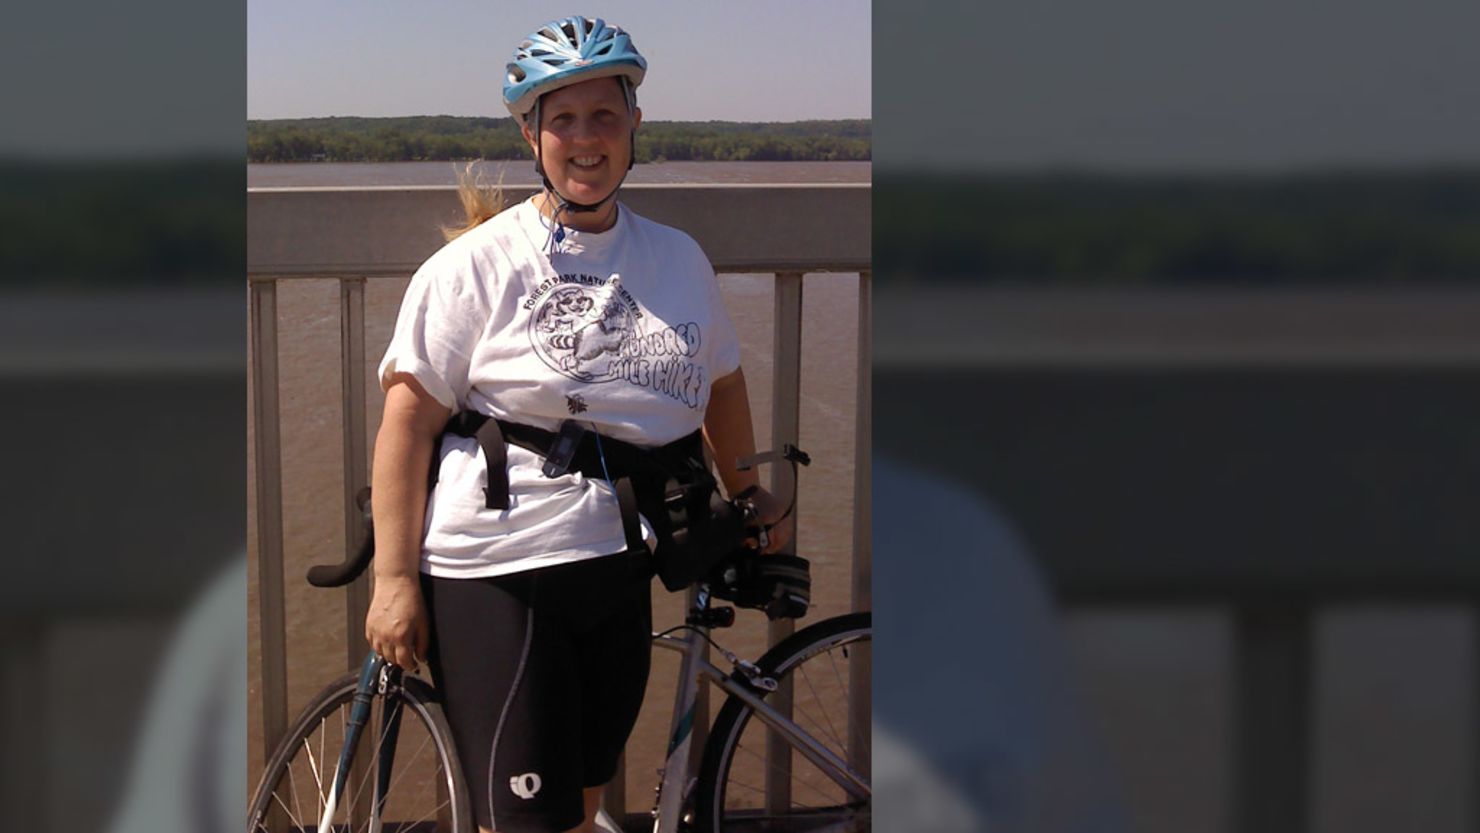 Shanna Kurth's 25-mile bike commute to work takes two hours, requiring extensive planning on her part several times a month.